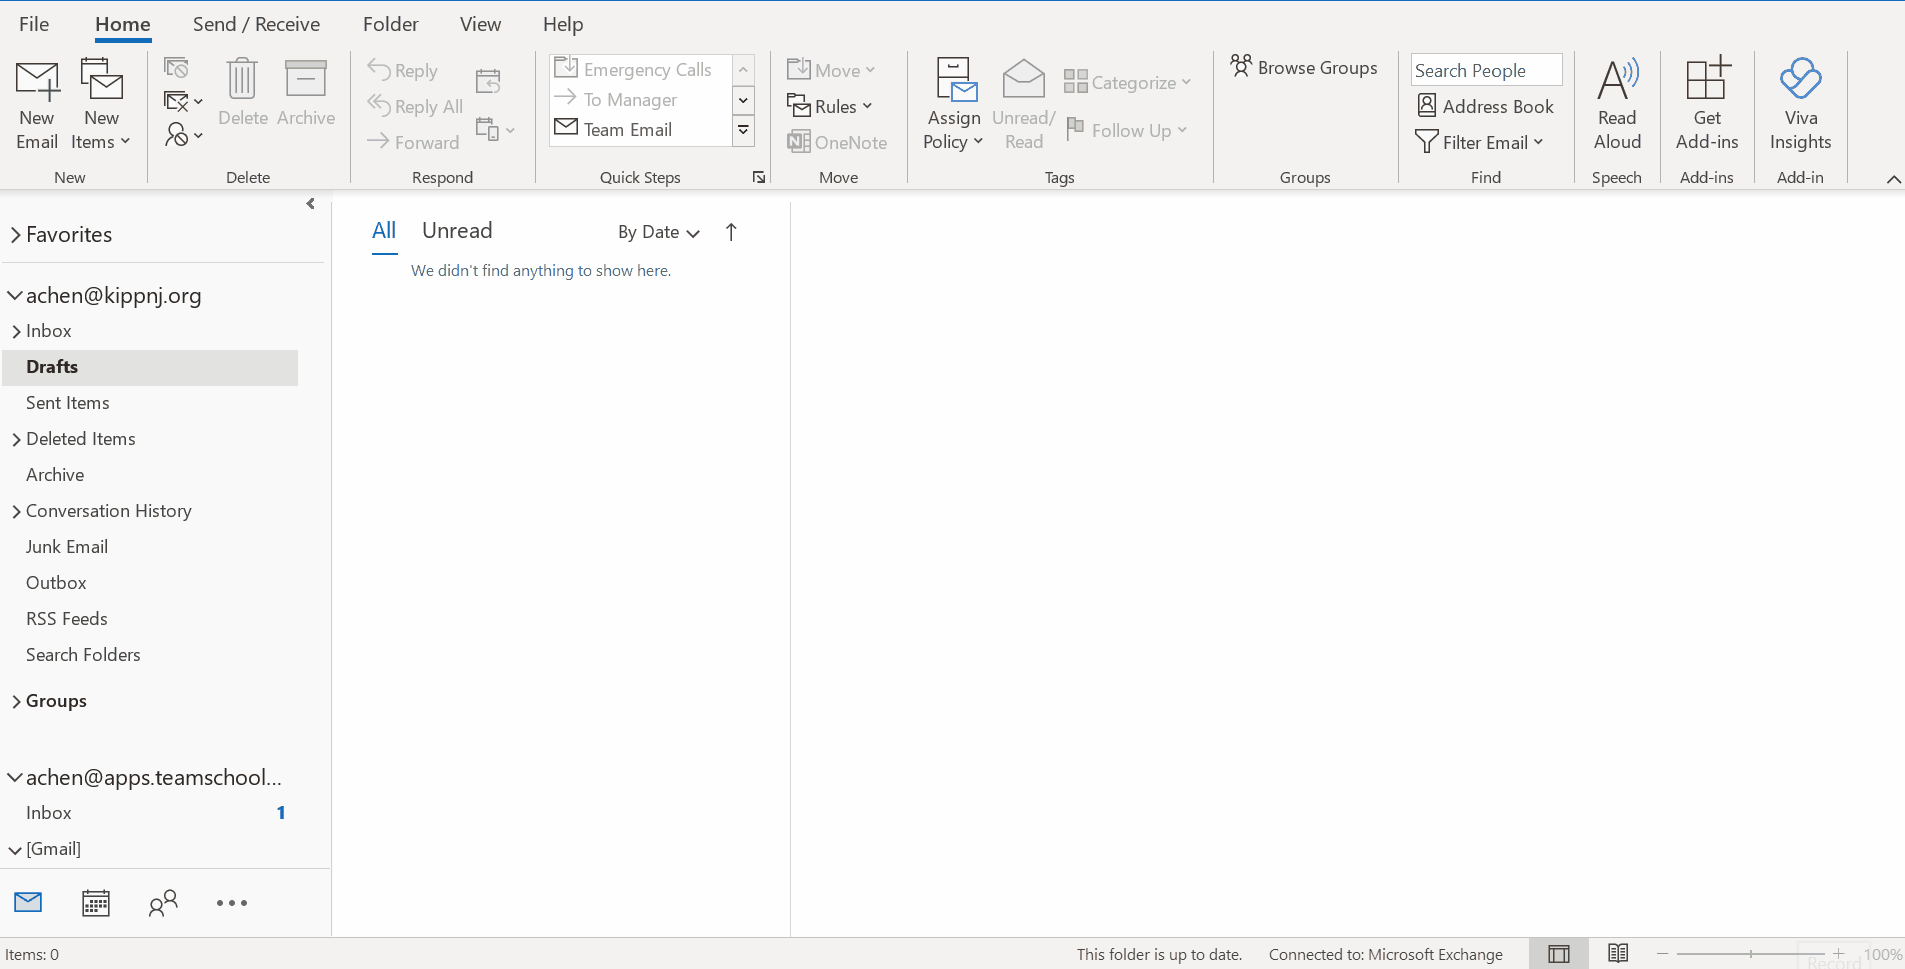 zoom for outlook plugin download